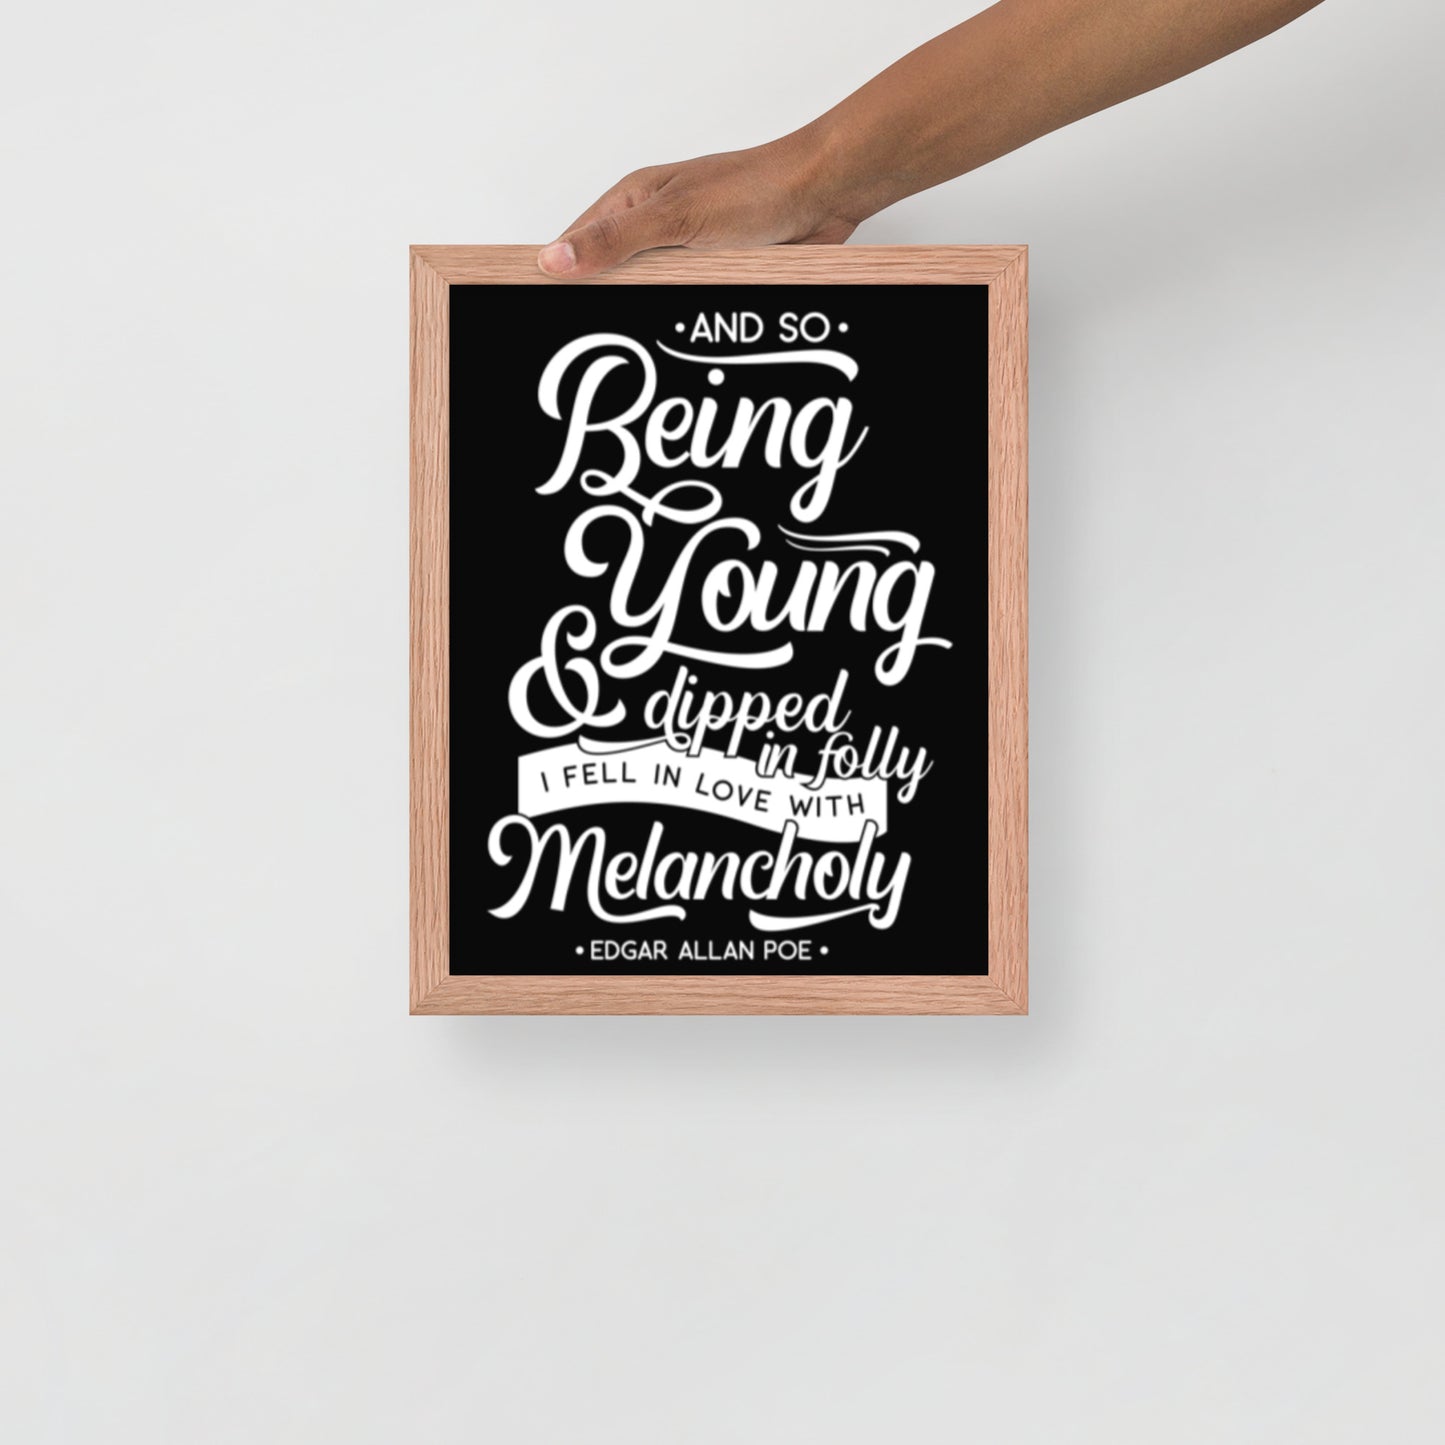 Products Fell in Love with Melancholy Edgar Allan Poe Quote Framed Poster - 11 x 14 Red Oak Frame